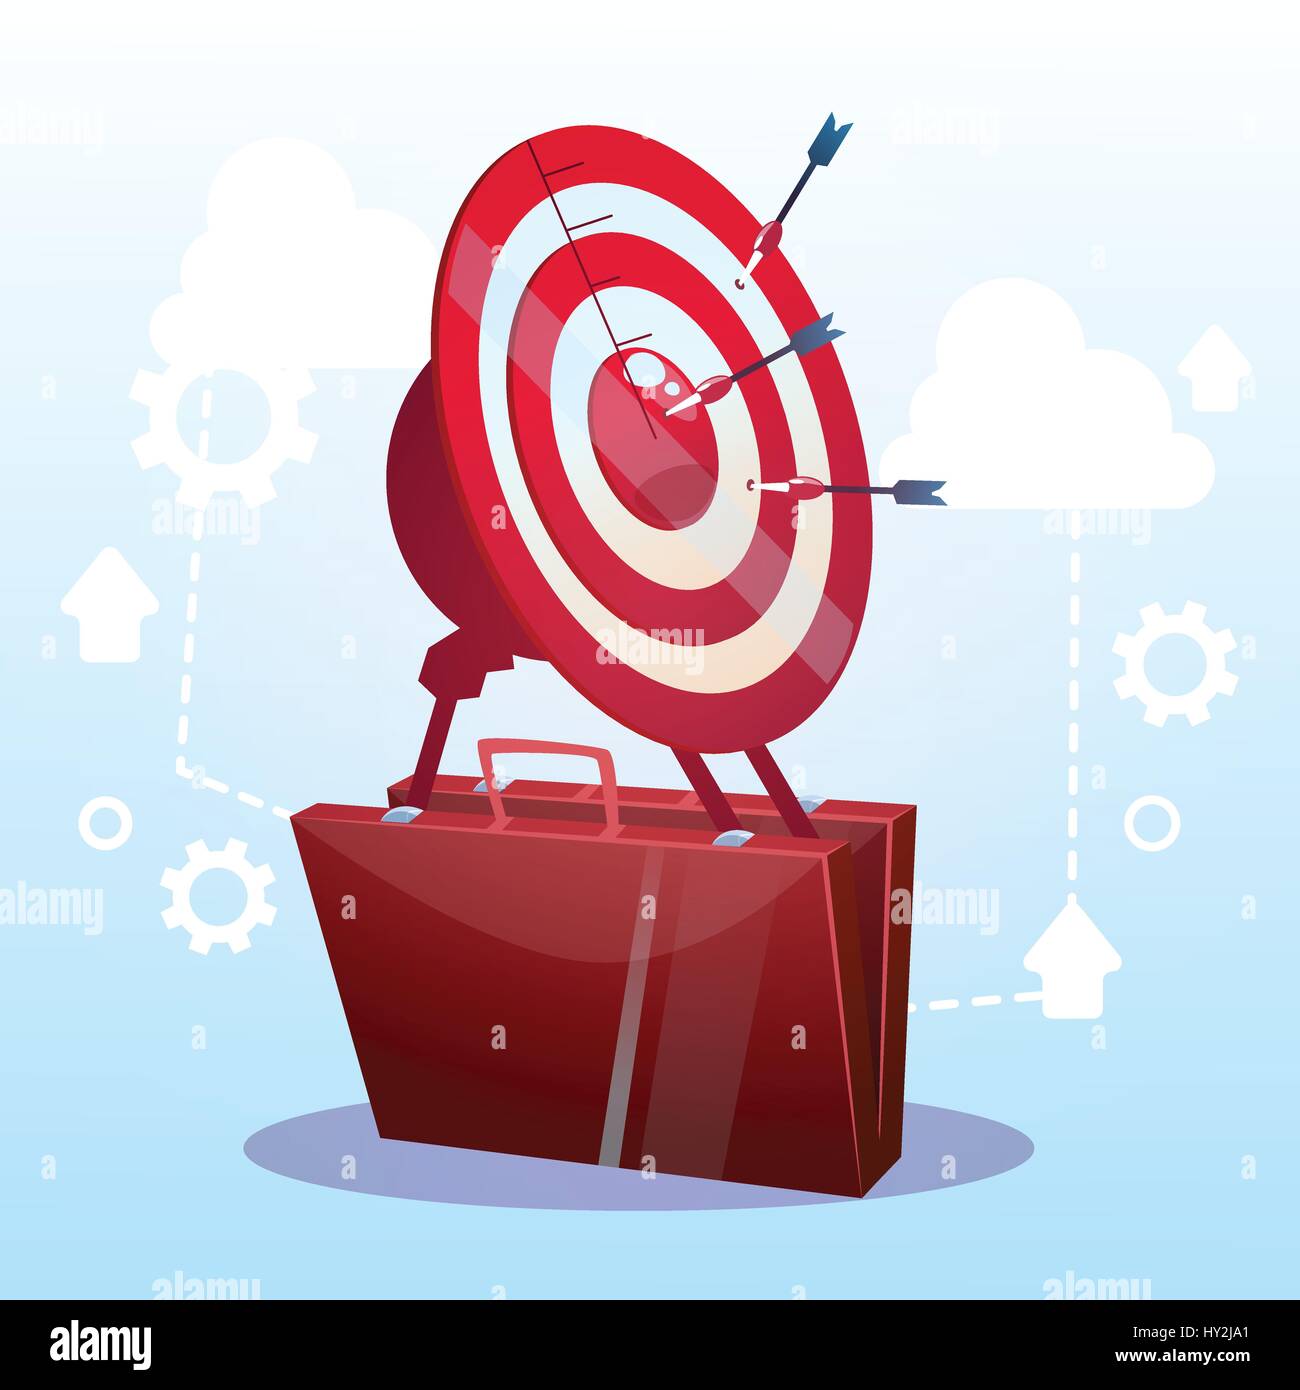 Open Briefcase Target Successful Goal Business Strategy Concept Stock Vector